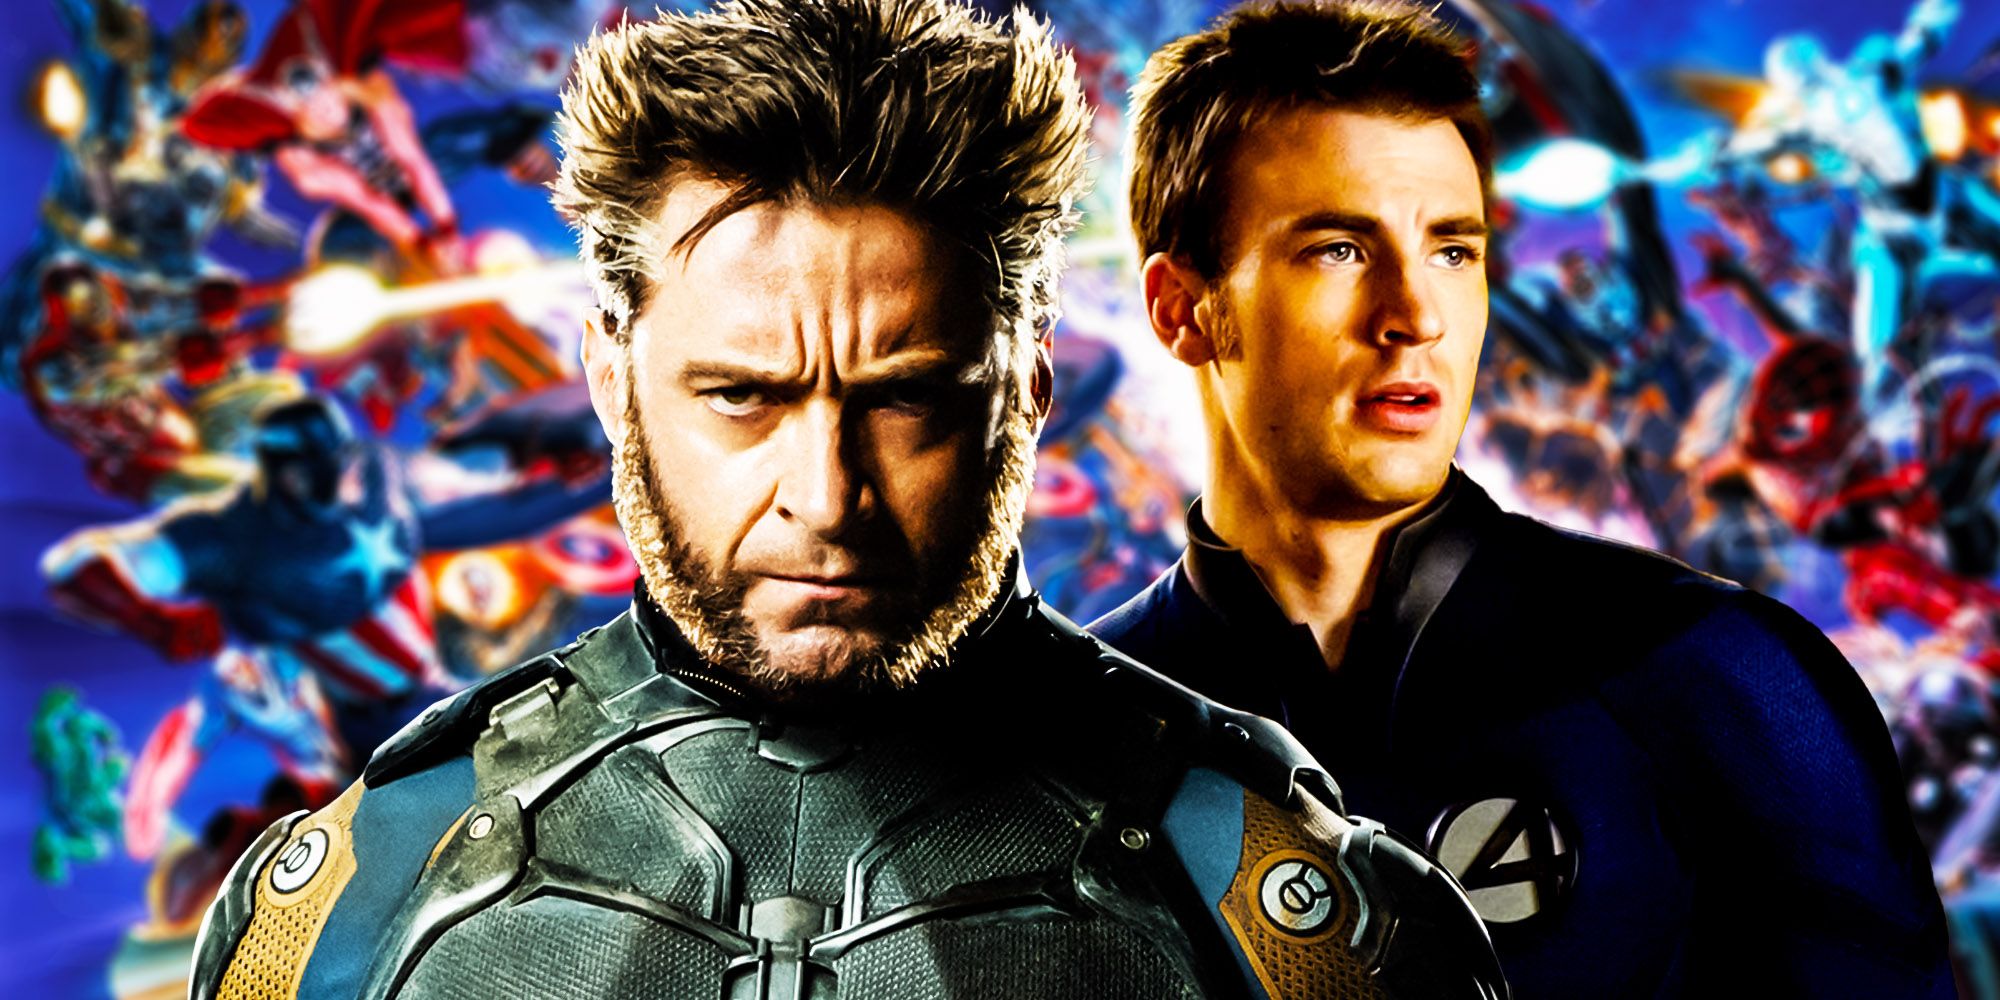 The comic backdrop of Secret Wars: Hugh Jackman's Wolverine and Chris Evans' The Human Torch